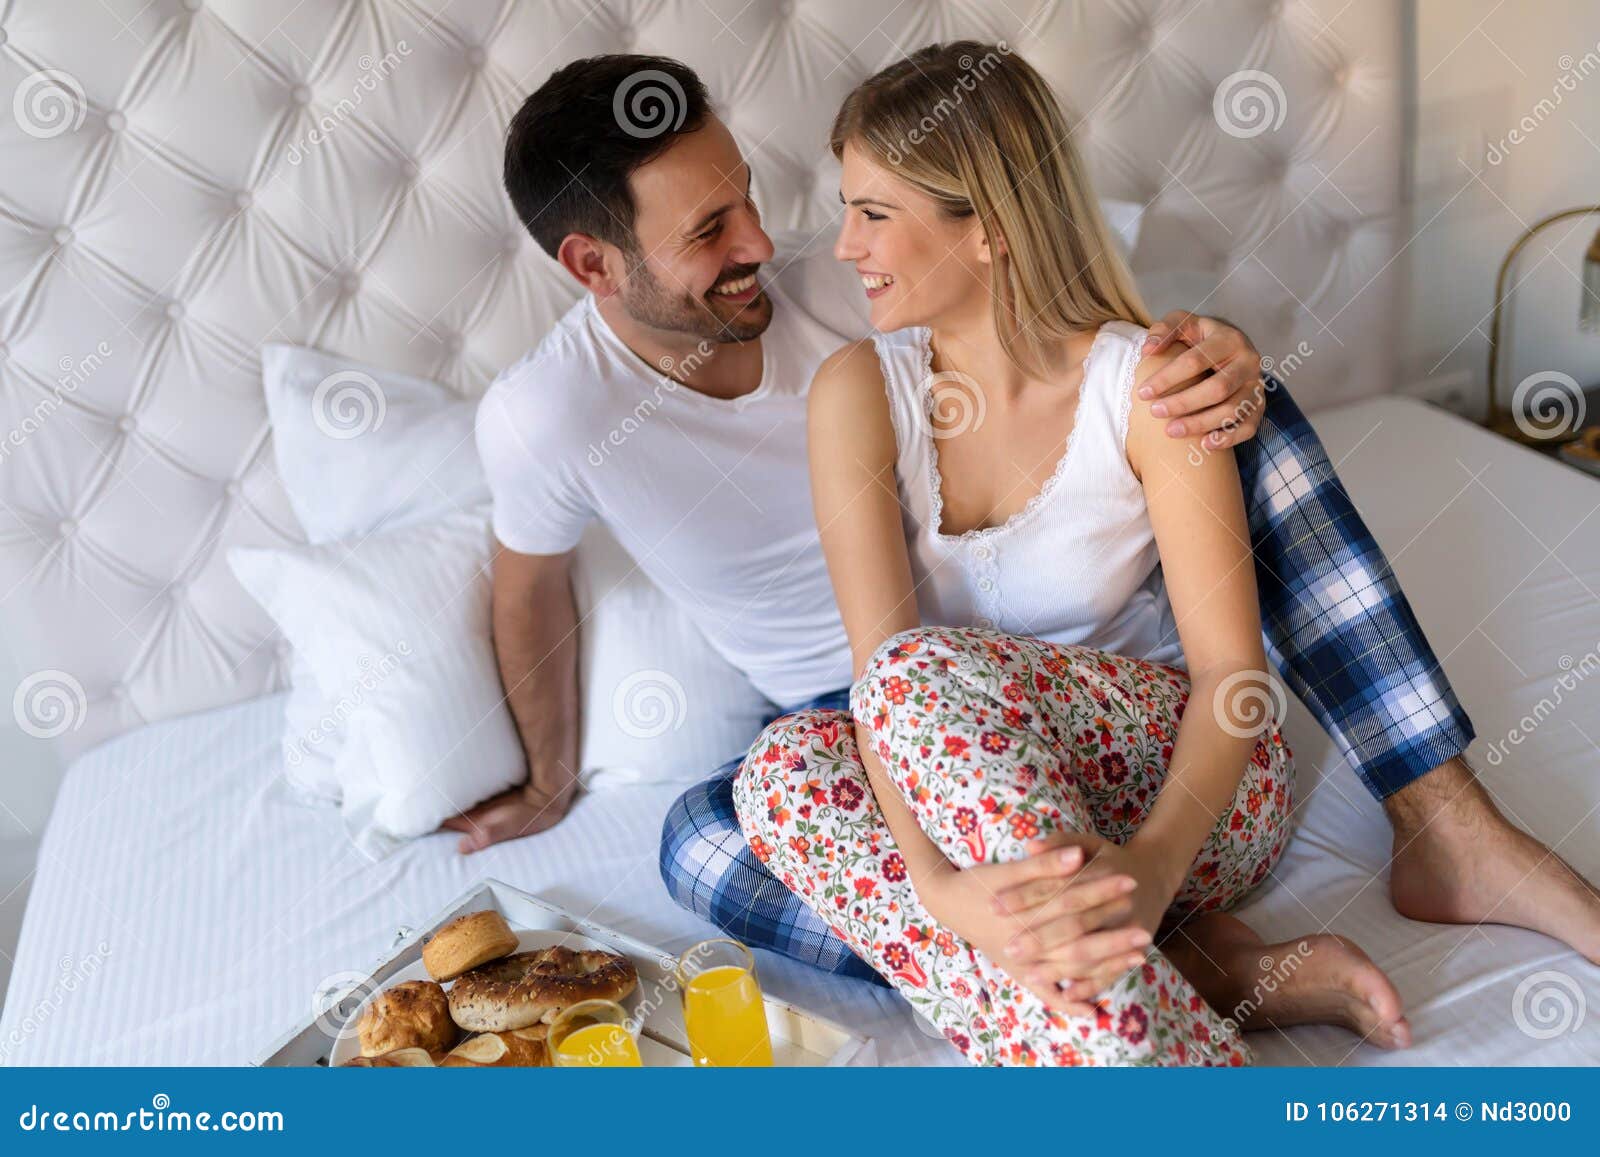 Romantic Husband Waking Wife with Breakfast in Bed Stock Photo photo